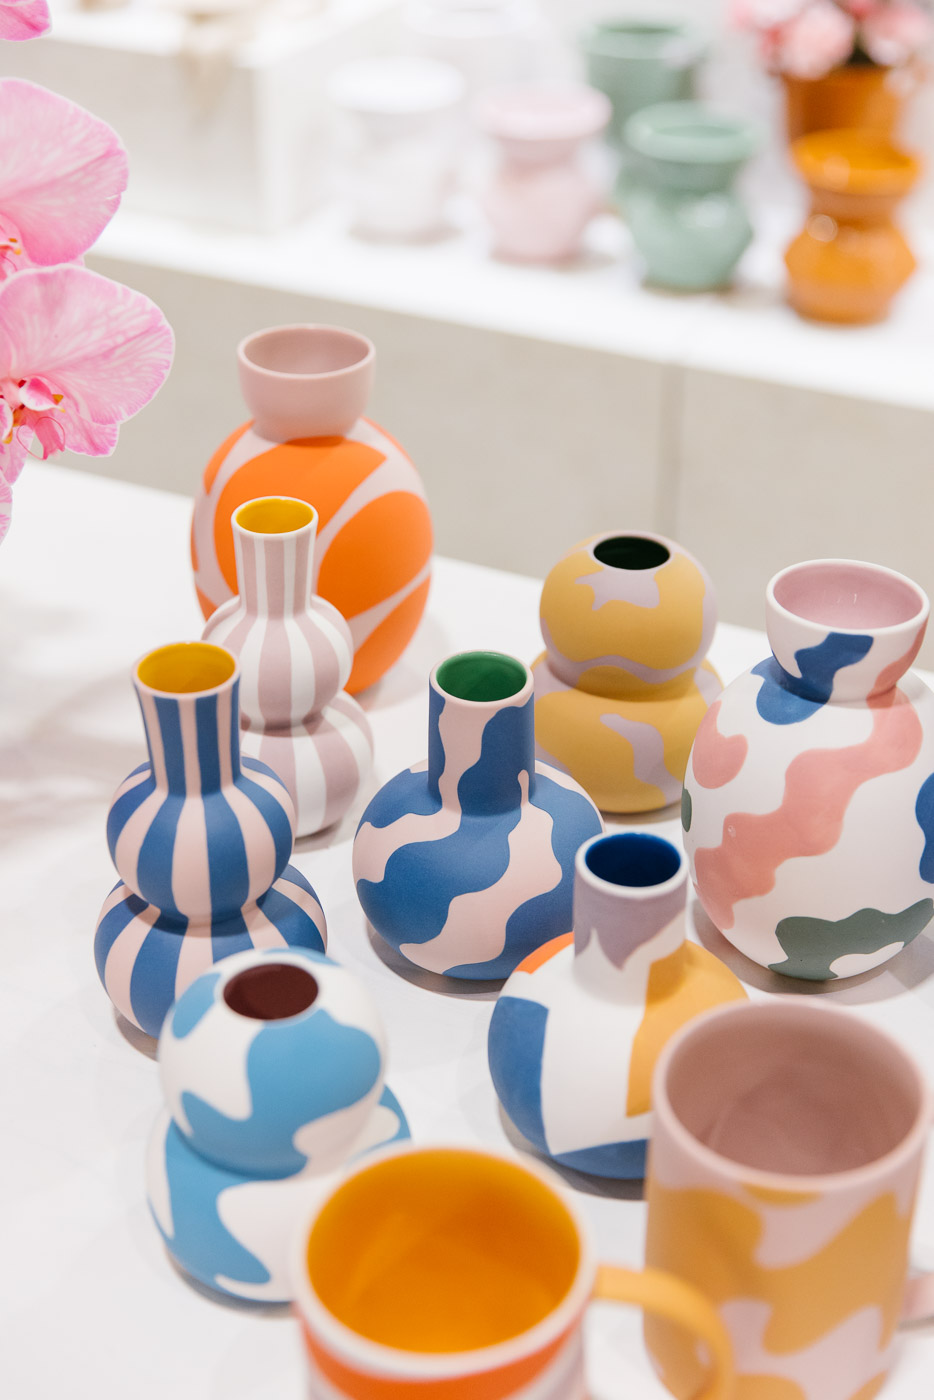 Jones and Co ceramic vases featured in bright bold colours and graphic patterns